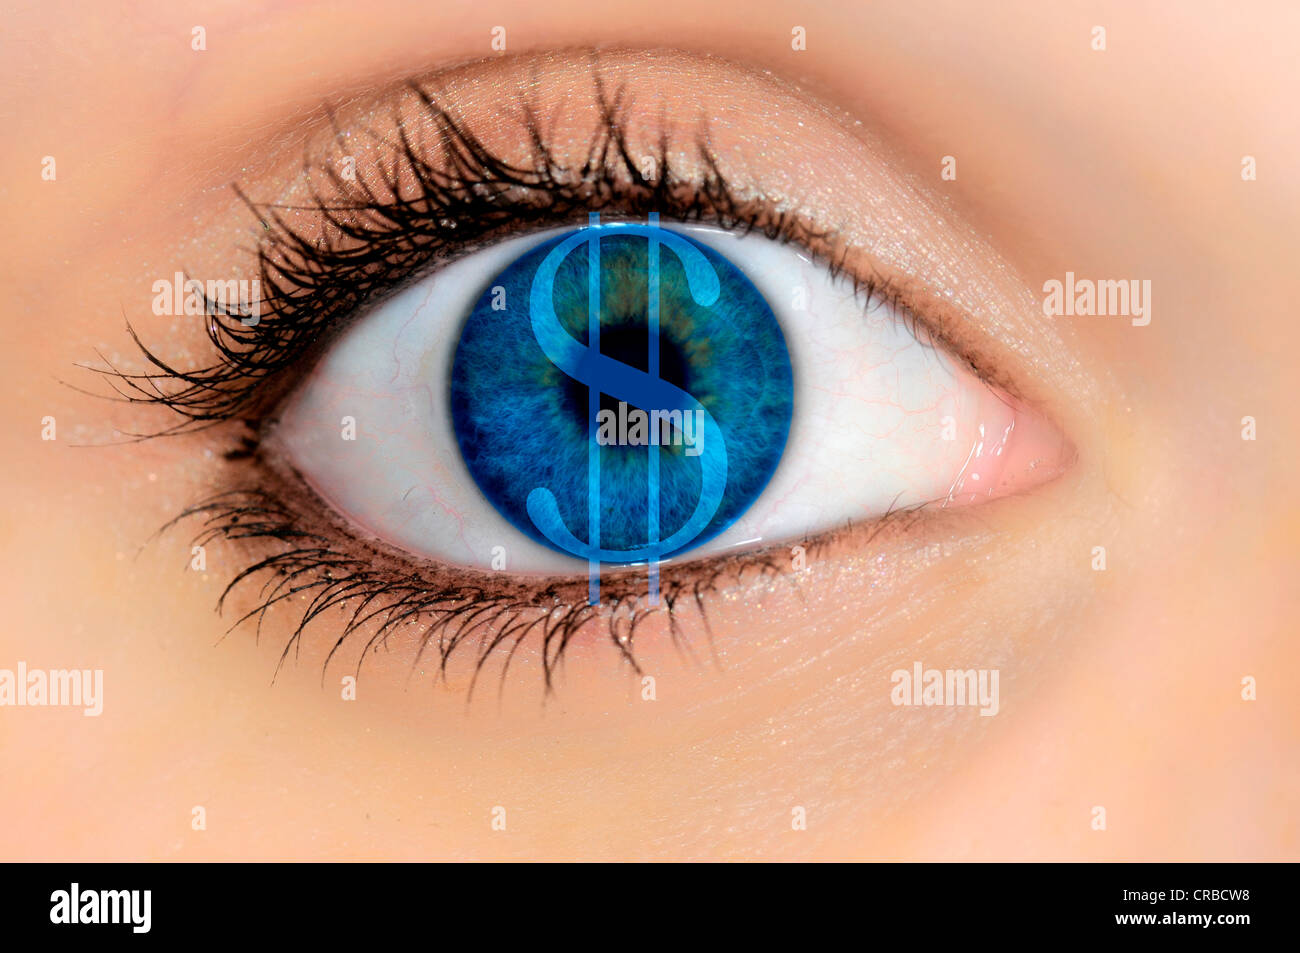 Detailed view of an eye with a dollar symbol, symbolic image for greed for money Stock Photo